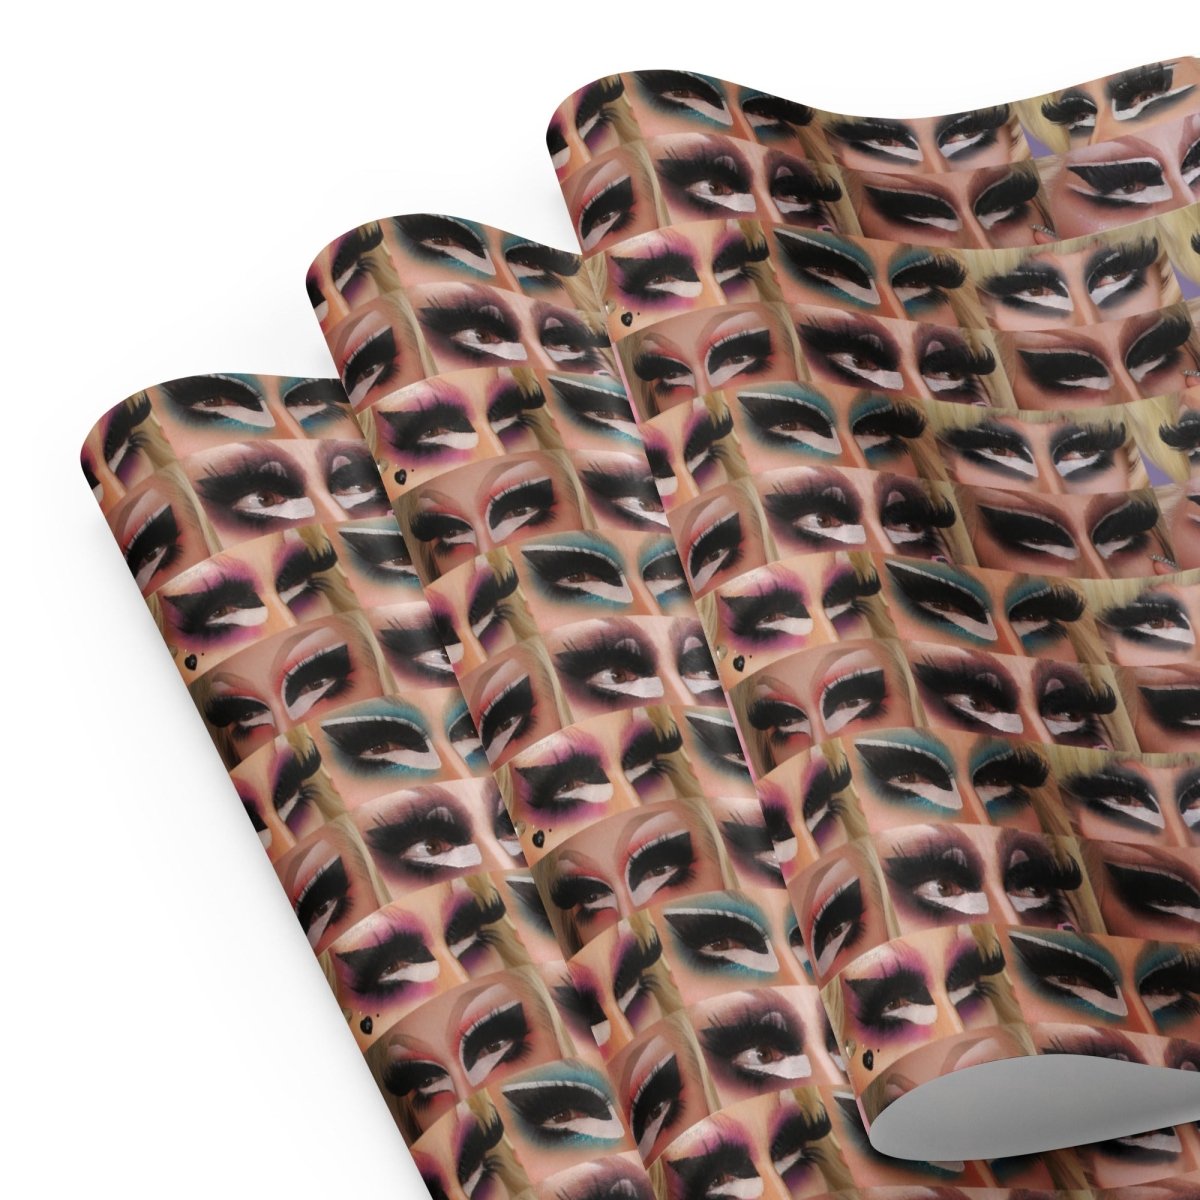 Trixie Mattel - Eyes Wrapping paper sheets - dragqueenmerch